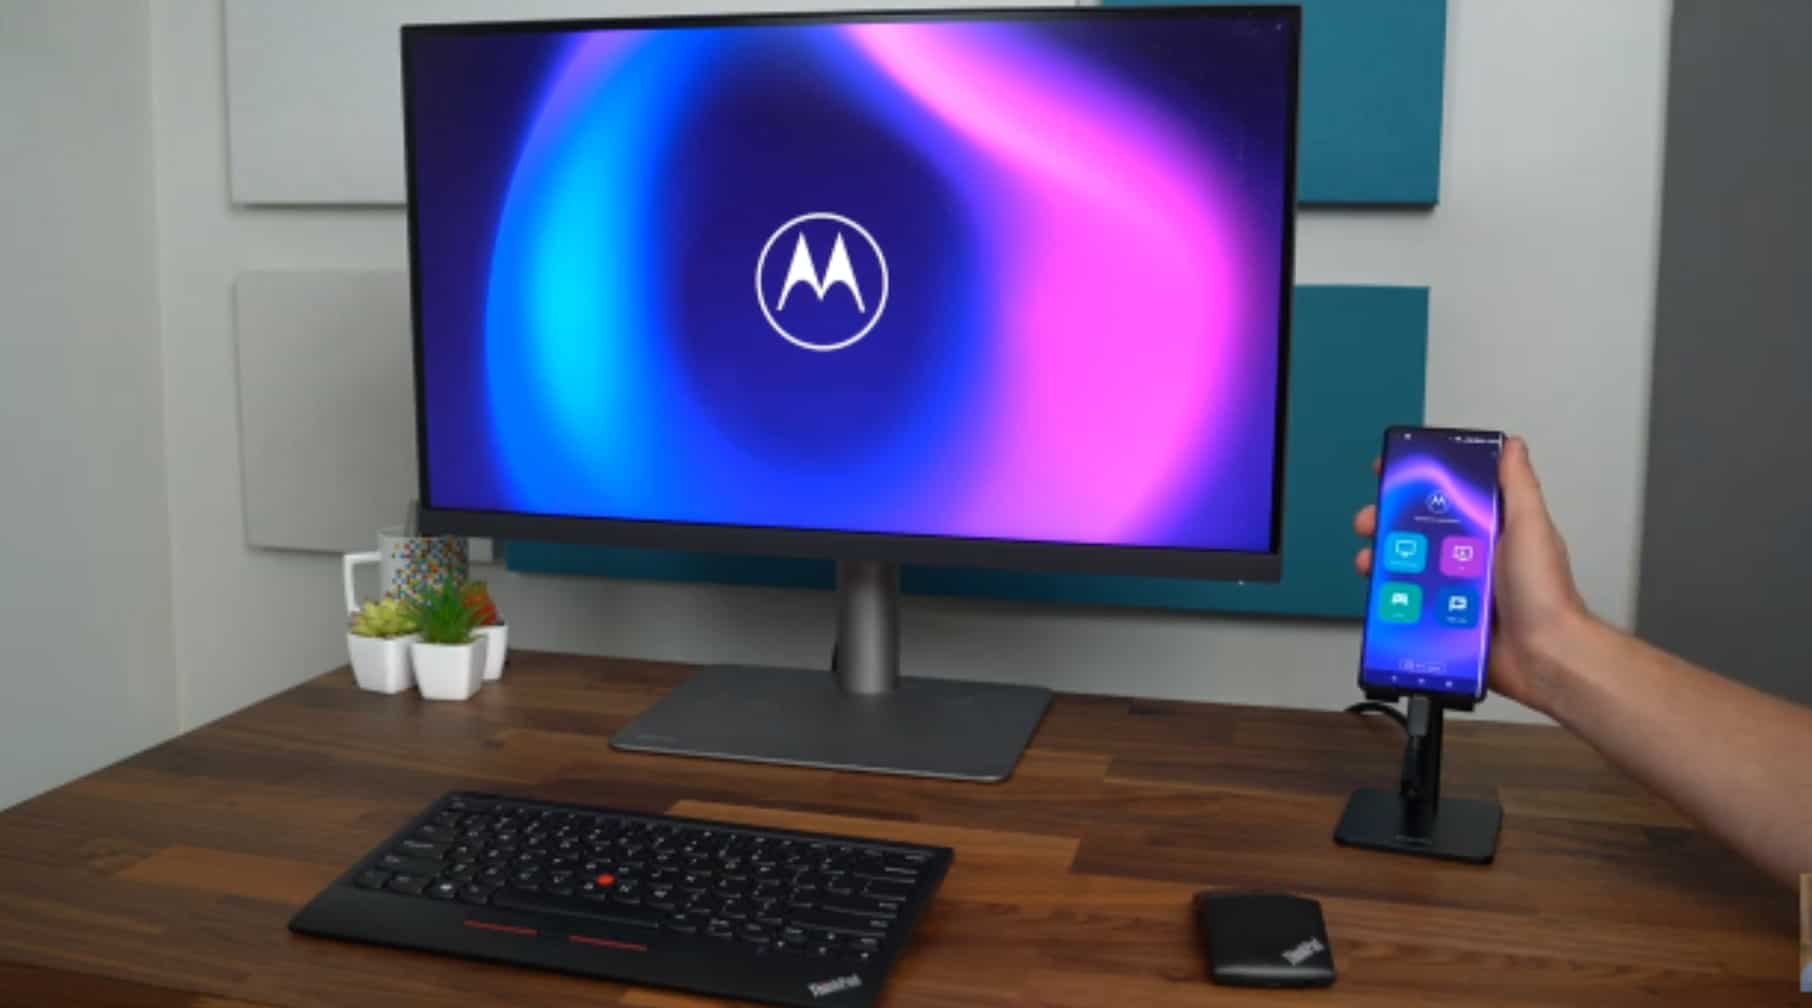 Motorola Launches 'Ready For', a Samsung Dex-like Platform for Edge+